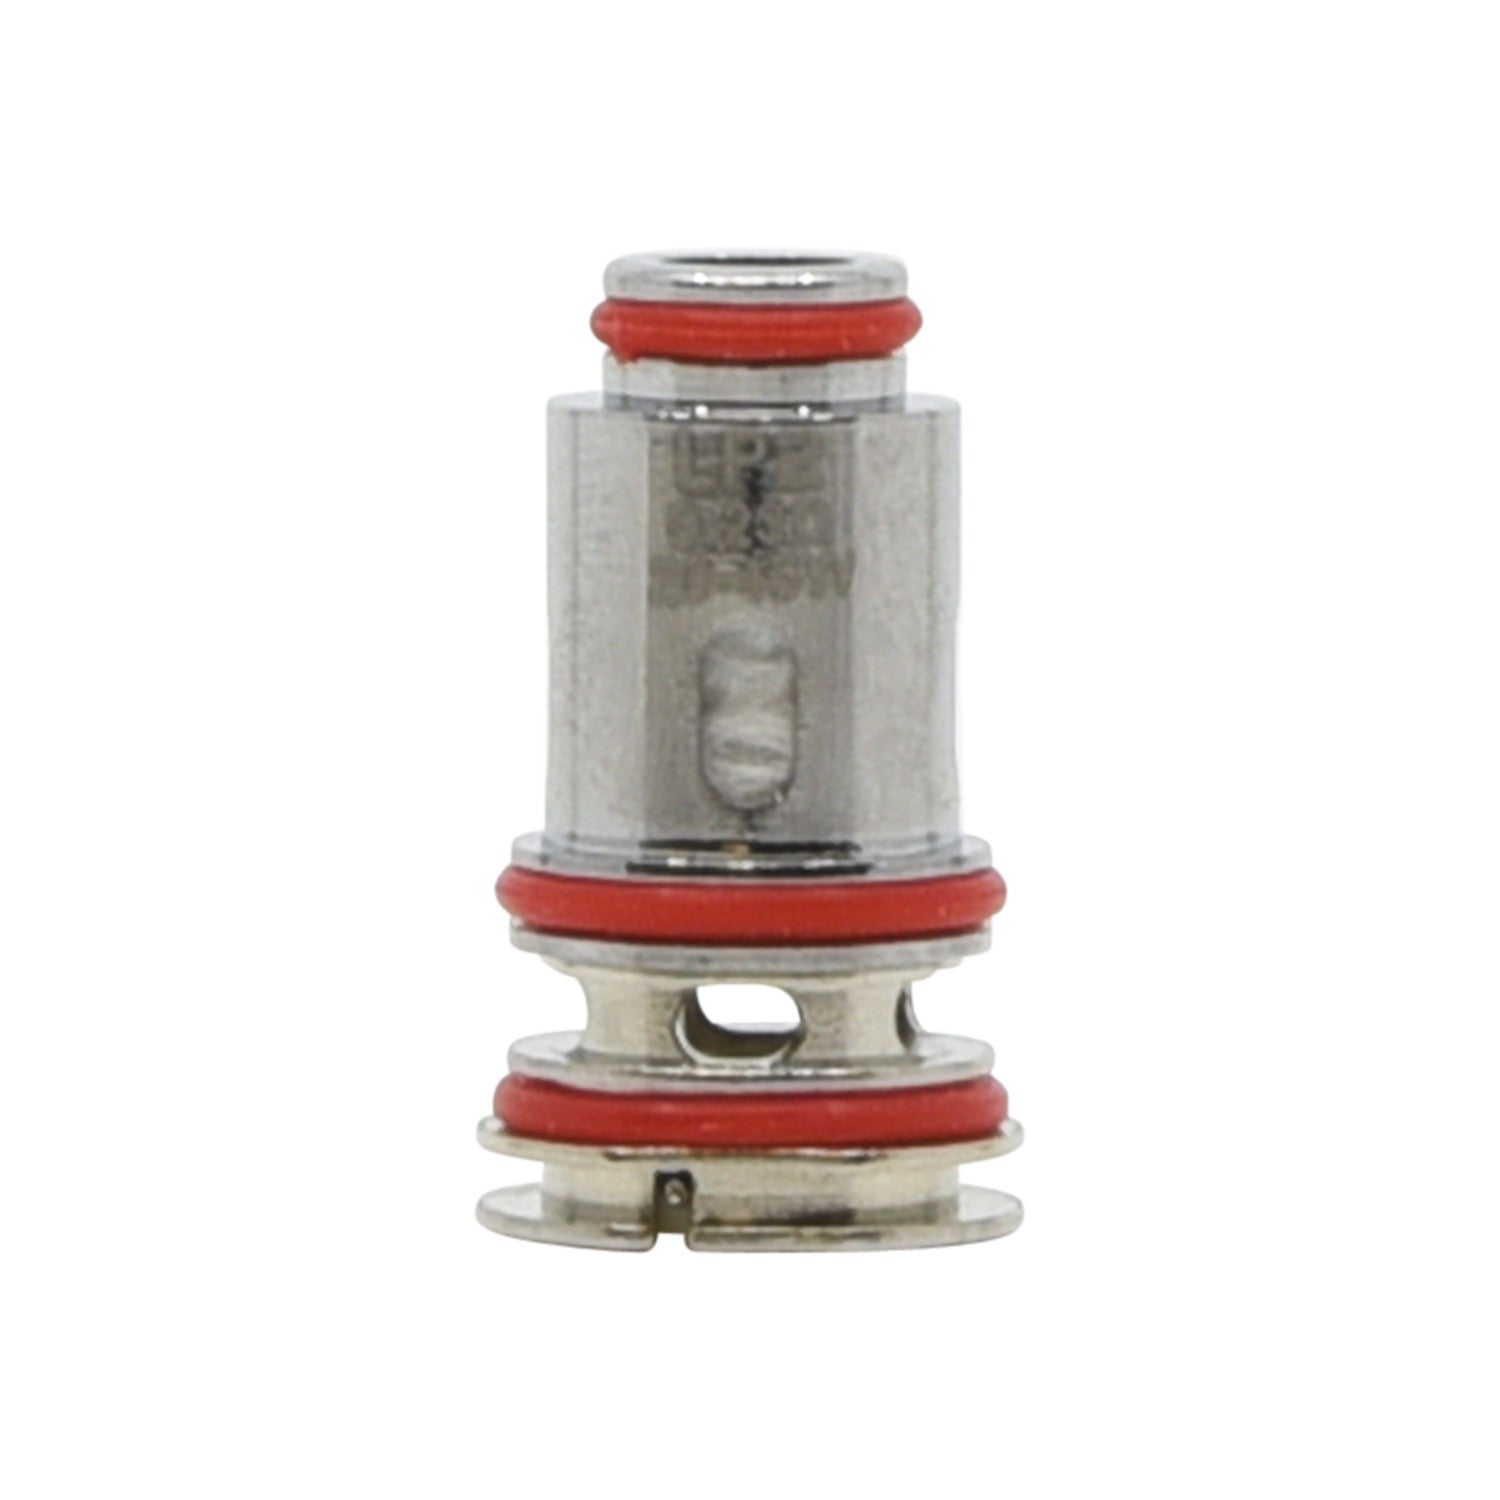 SMOK LP2 Meshed (0.23ohm) Coil